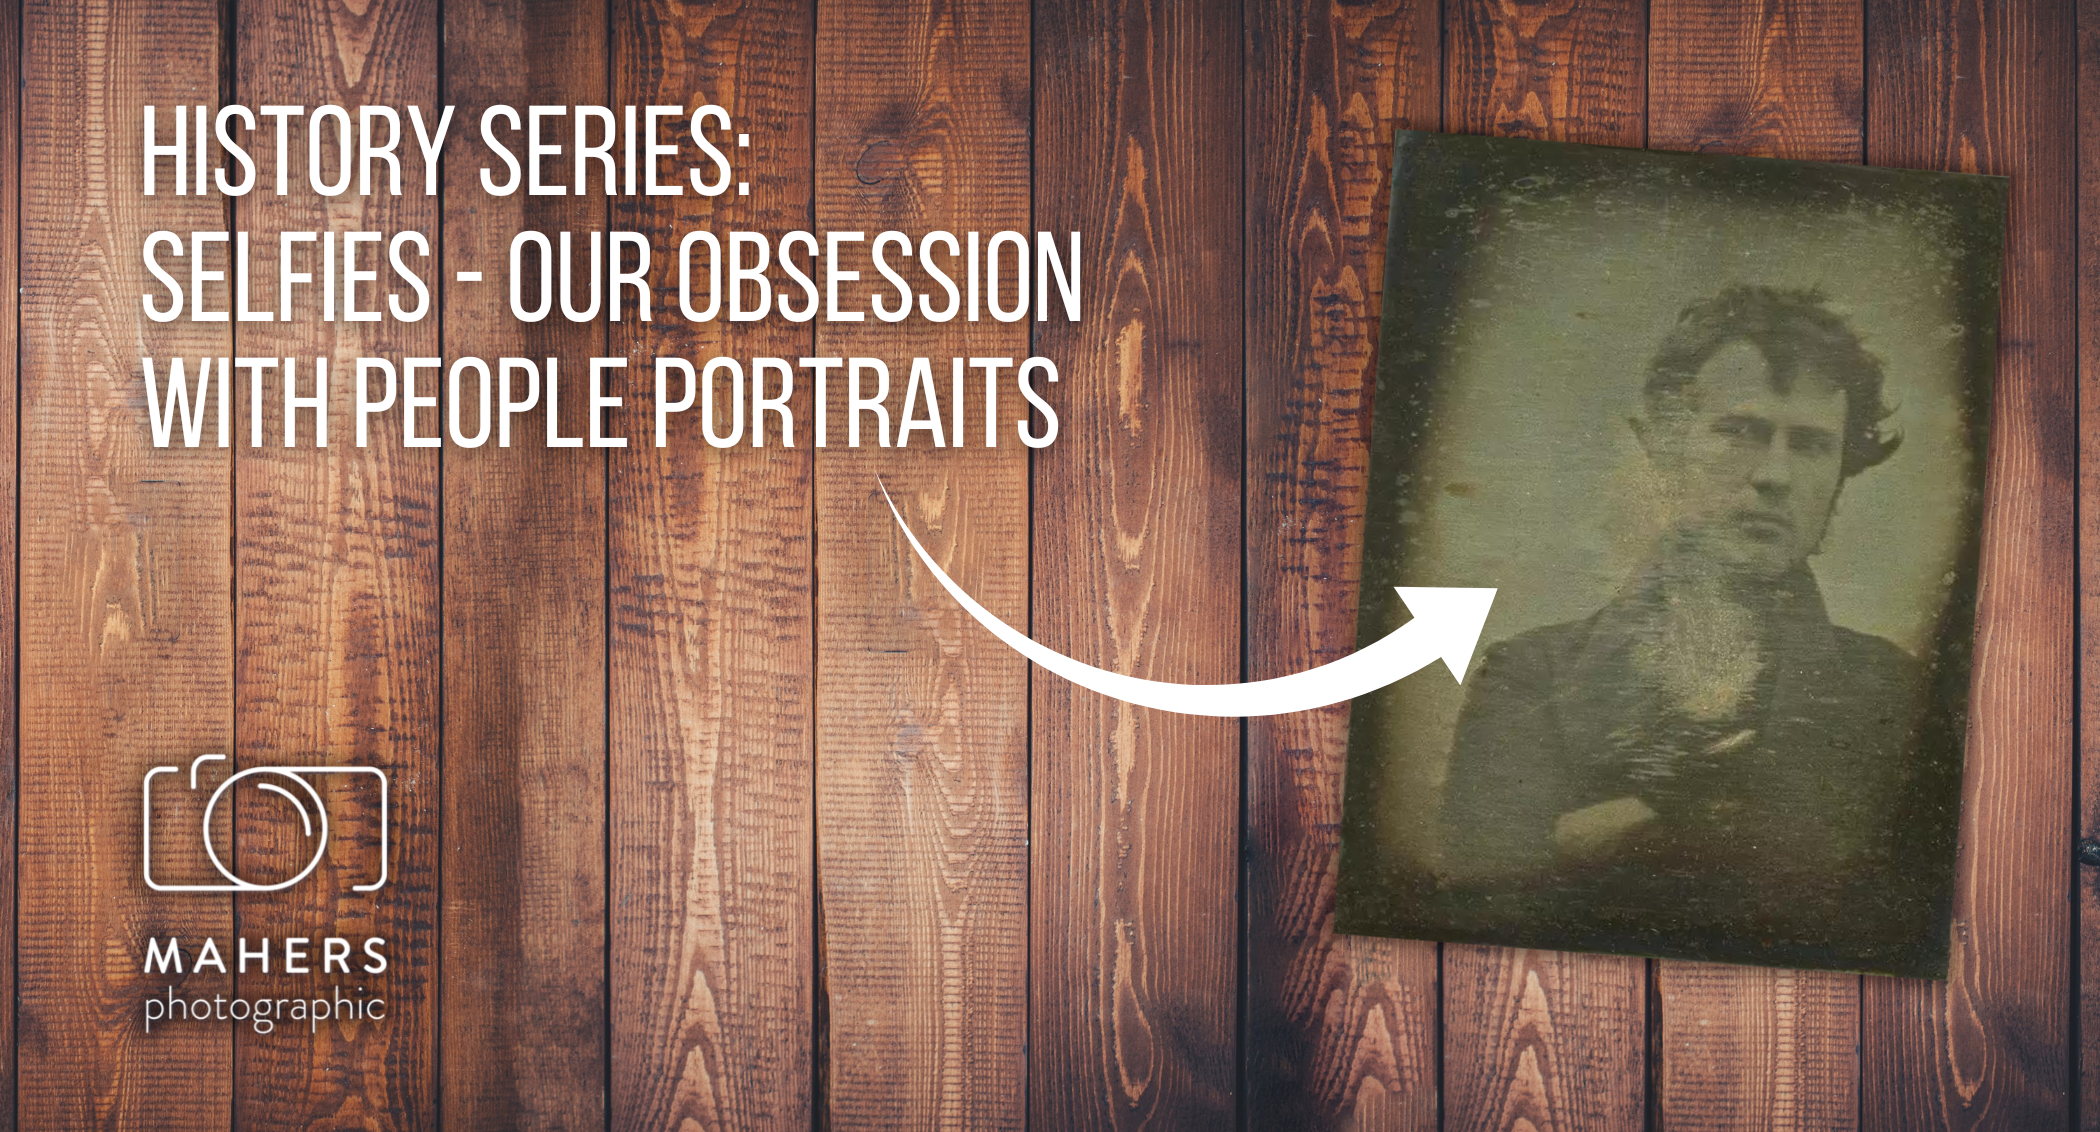 Selfies - our obsession with people portraits